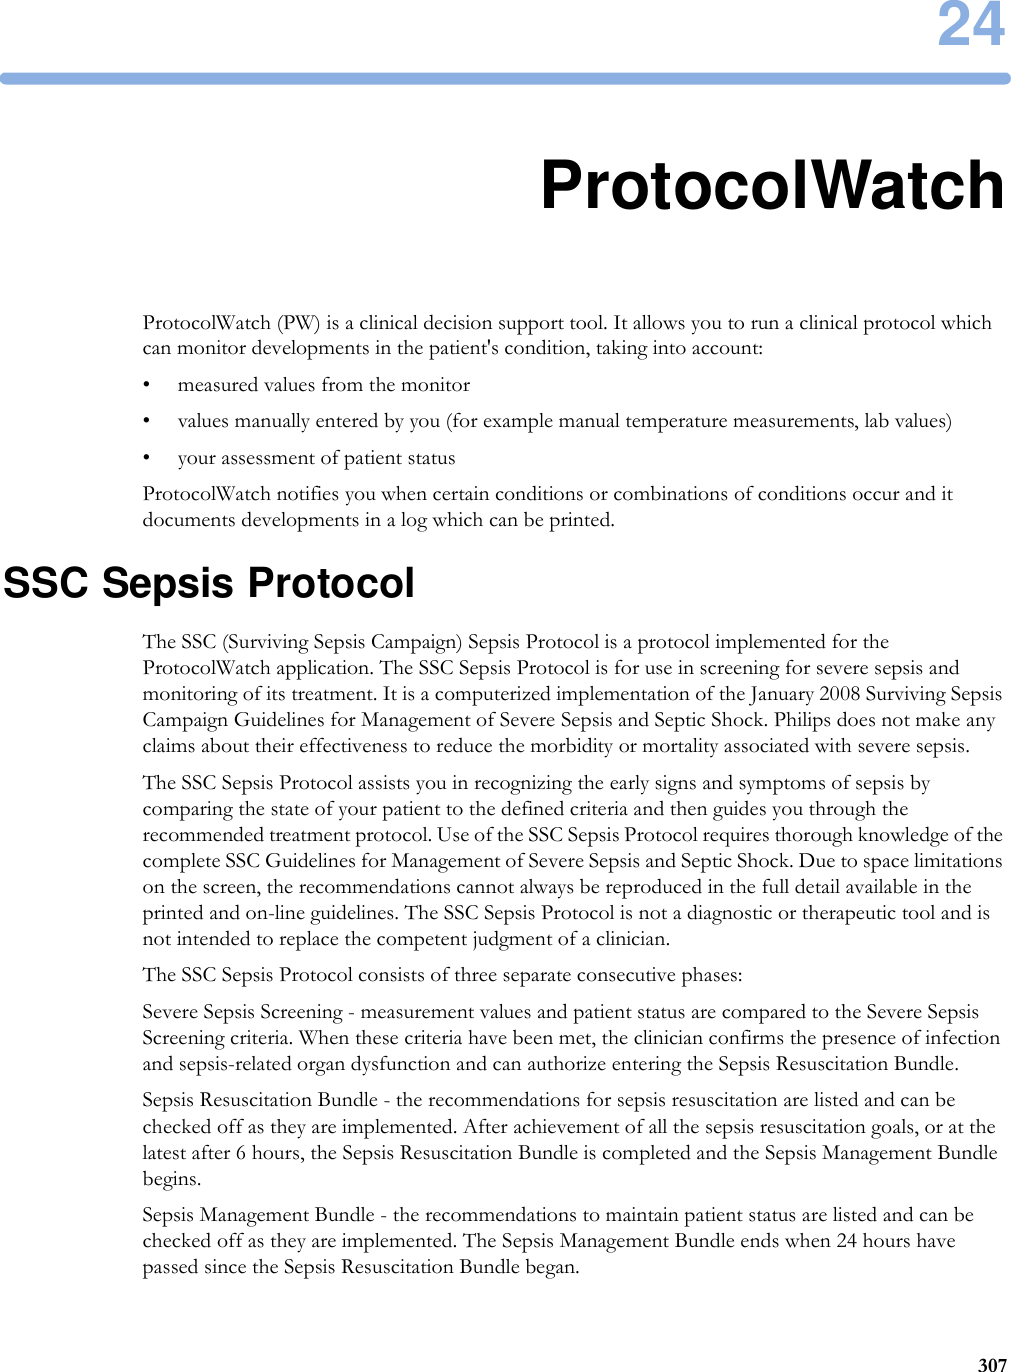 2430724ProtocolWatchProtocolWatch (PW) is a clinical decision support tool. It allows you to run a clinical protocol which can monitor developments in the patient&apos;s condition, taking into account:• measured values from the monitor• values manually entered by you (for example manual temperature measurements, lab values)• your assessment of patient statusProtocolWatch notifies you when certain conditions or combinations of conditions occur and it documents developments in a log which can be printed.SSC Sepsis ProtocolThe SSC (Surviving Sepsis Campaign) Sepsis Protocol is a protocol implemented for the ProtocolWatch application. The SSC Sepsis Protocol is for use in screening for severe sepsis and monitoring of its treatment. It is a computerized implementation of the January 2008 Surviving Sepsis Campaign Guidelines for Management of Severe Sepsis and Septic Shock. Philips does not make any claims about their effectiveness to reduce the morbidity or mortality associated with severe sepsis.The SSC Sepsis Protocol assists you in recognizing the early signs and symptoms of sepsis by comparing the state of your patient to the defined criteria and then guides you through the recommended treatment protocol. Use of the SSC Sepsis Protocol requires thorough knowledge of the complete SSC Guidelines for Management of Severe Sepsis and Septic Shock. Due to space limitations on the screen, the recommendations cannot always be reproduced in the full detail available in the printed and on-line guidelines. The SSC Sepsis Protocol is not a diagnostic or therapeutic tool and is not intended to replace the competent judgment of a clinician.The SSC Sepsis Protocol consists of three separate consecutive phases:Severe Sepsis Screening - measurement values and patient status are compared to the Severe Sepsis Screening criteria. When these criteria have been met, the clinician confirms the presence of infection and sepsis-related organ dysfunction and can authorize entering the Sepsis Resuscitation Bundle.Sepsis Resuscitation Bundle - the recommendations for sepsis resuscitation are listed and can be checked off as they are implemented. After achievement of all the sepsis resuscitation goals, or at the latest after 6 hours, the Sepsis Resuscitation Bundle is completed and the Sepsis Management Bundle begins.Sepsis Management Bundle - the recommendations to maintain patient status are listed and can be checked off as they are implemented. The Sepsis Management Bundle ends when 24 hours have passed since the Sepsis Resuscitation Bundle began.